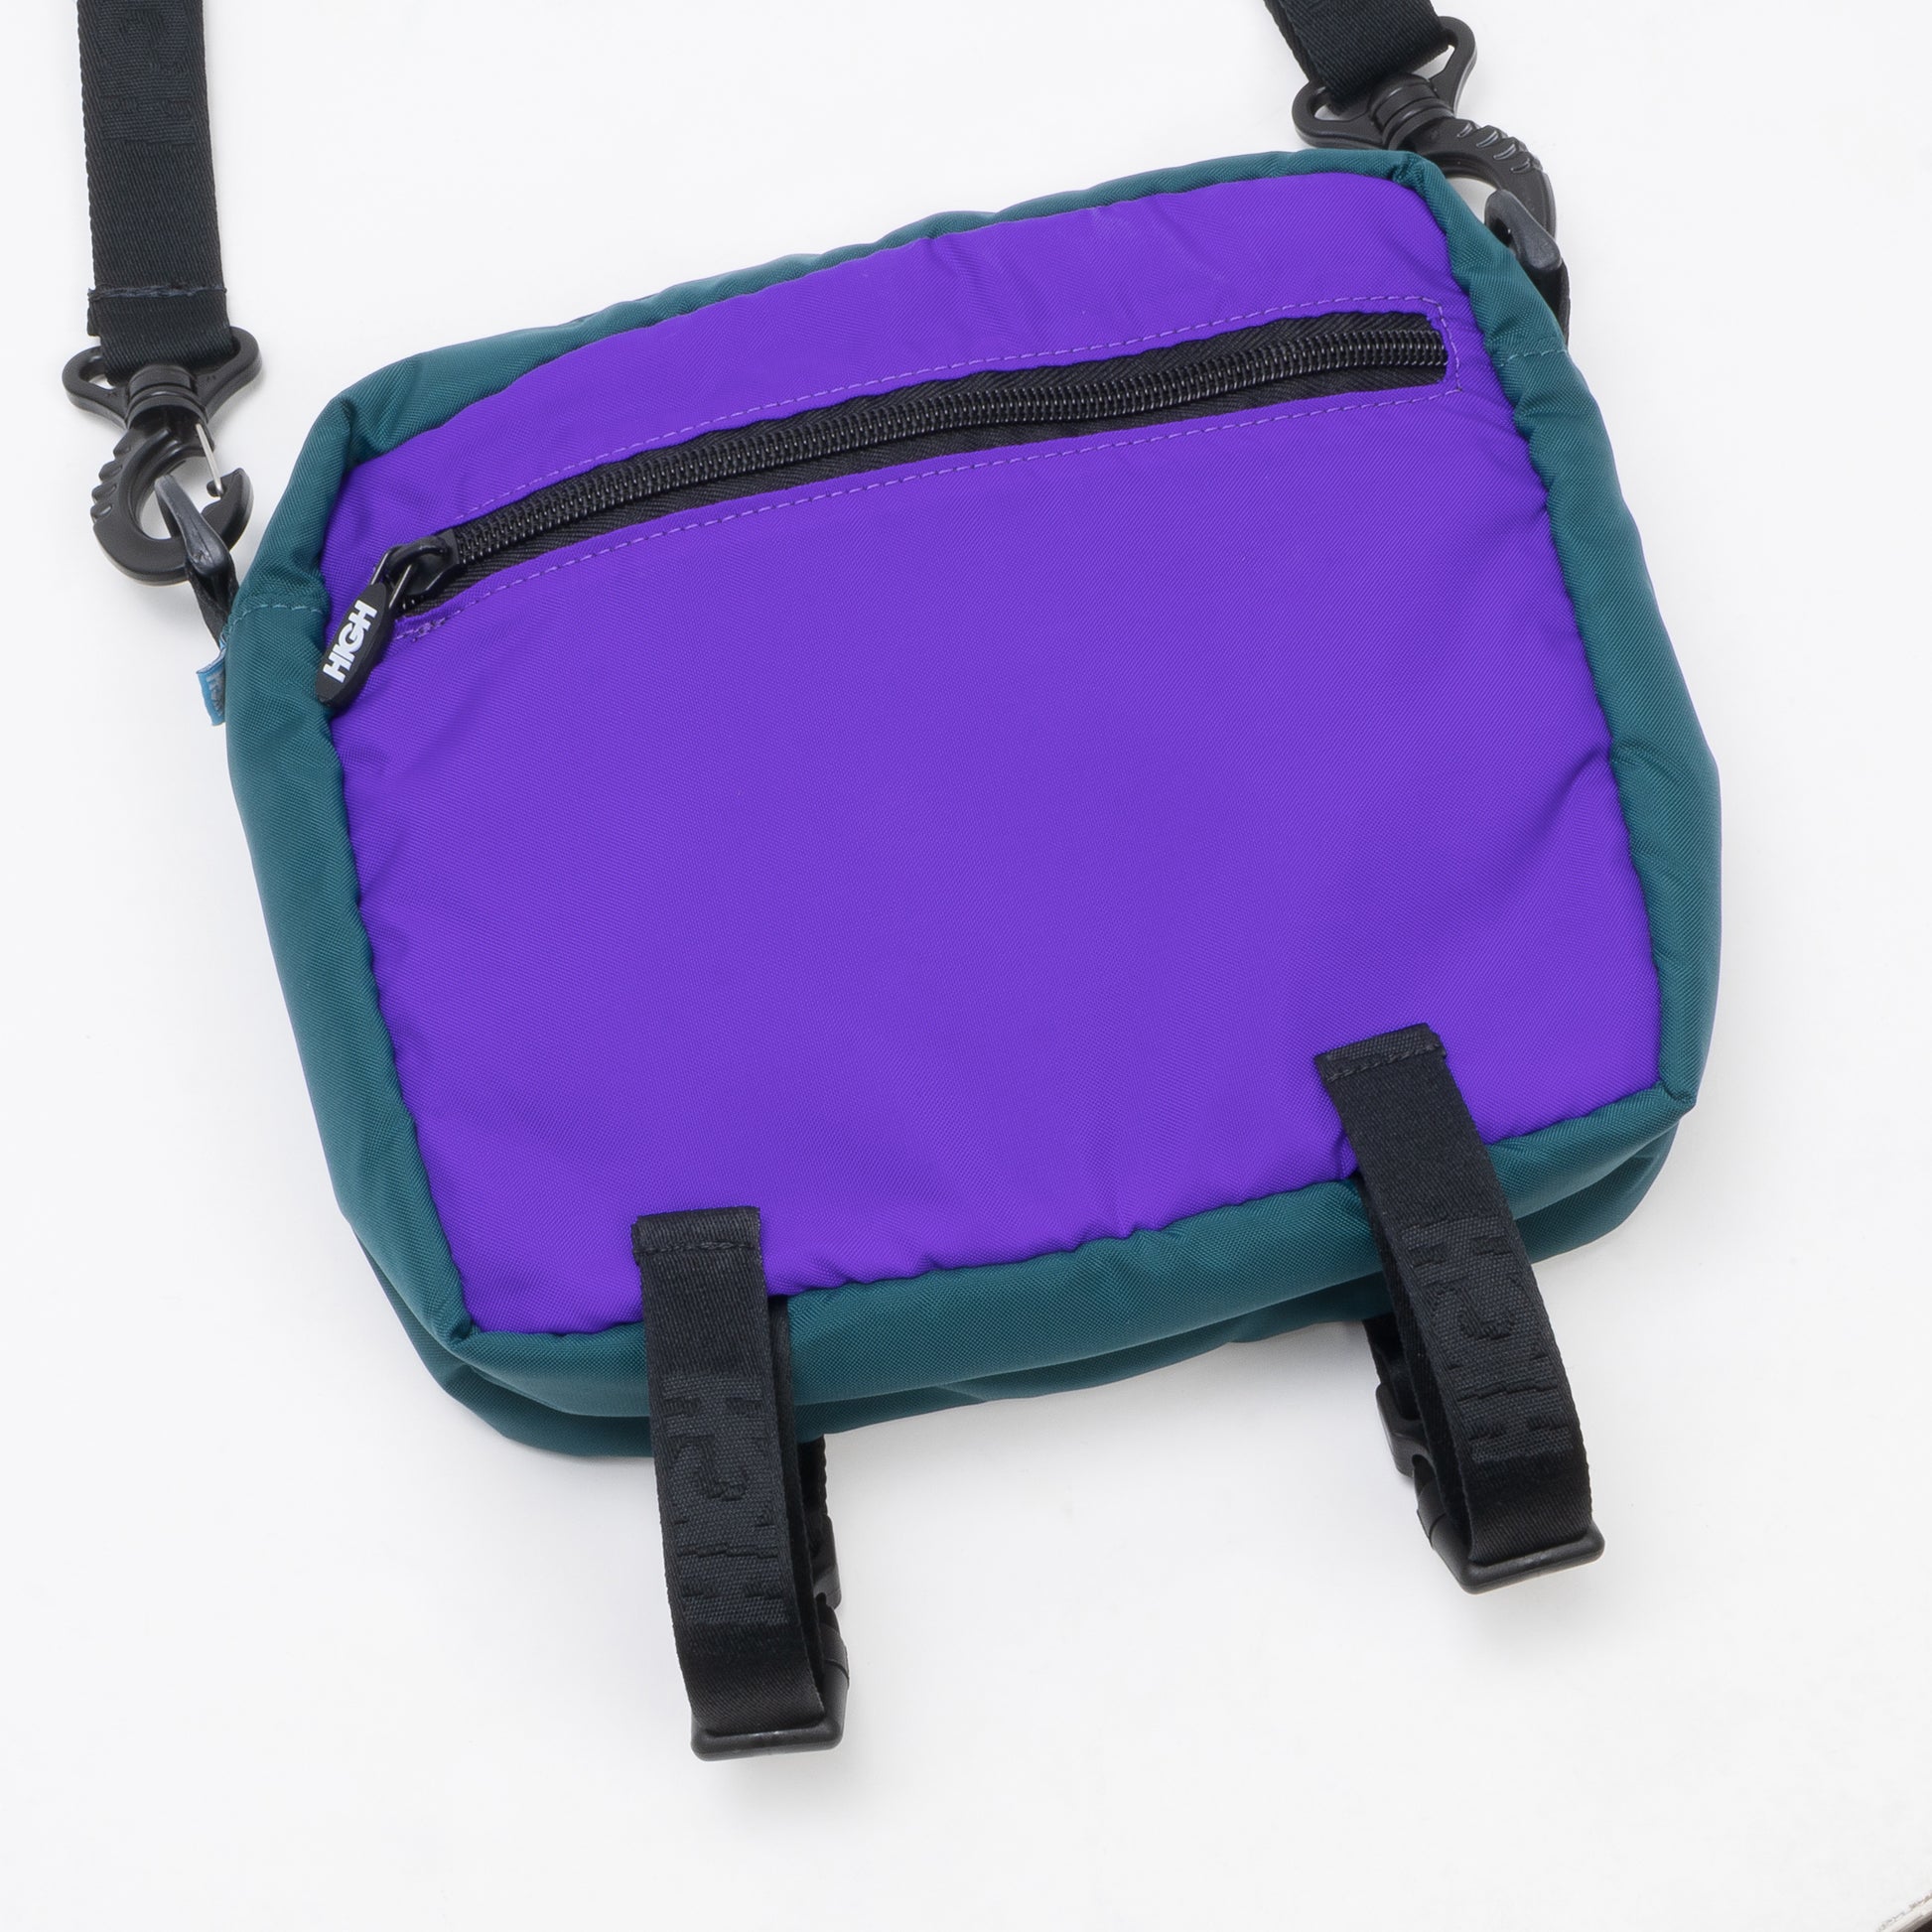 High - Outdoor Shoulder Bag "Green/Purple" - THE GAME